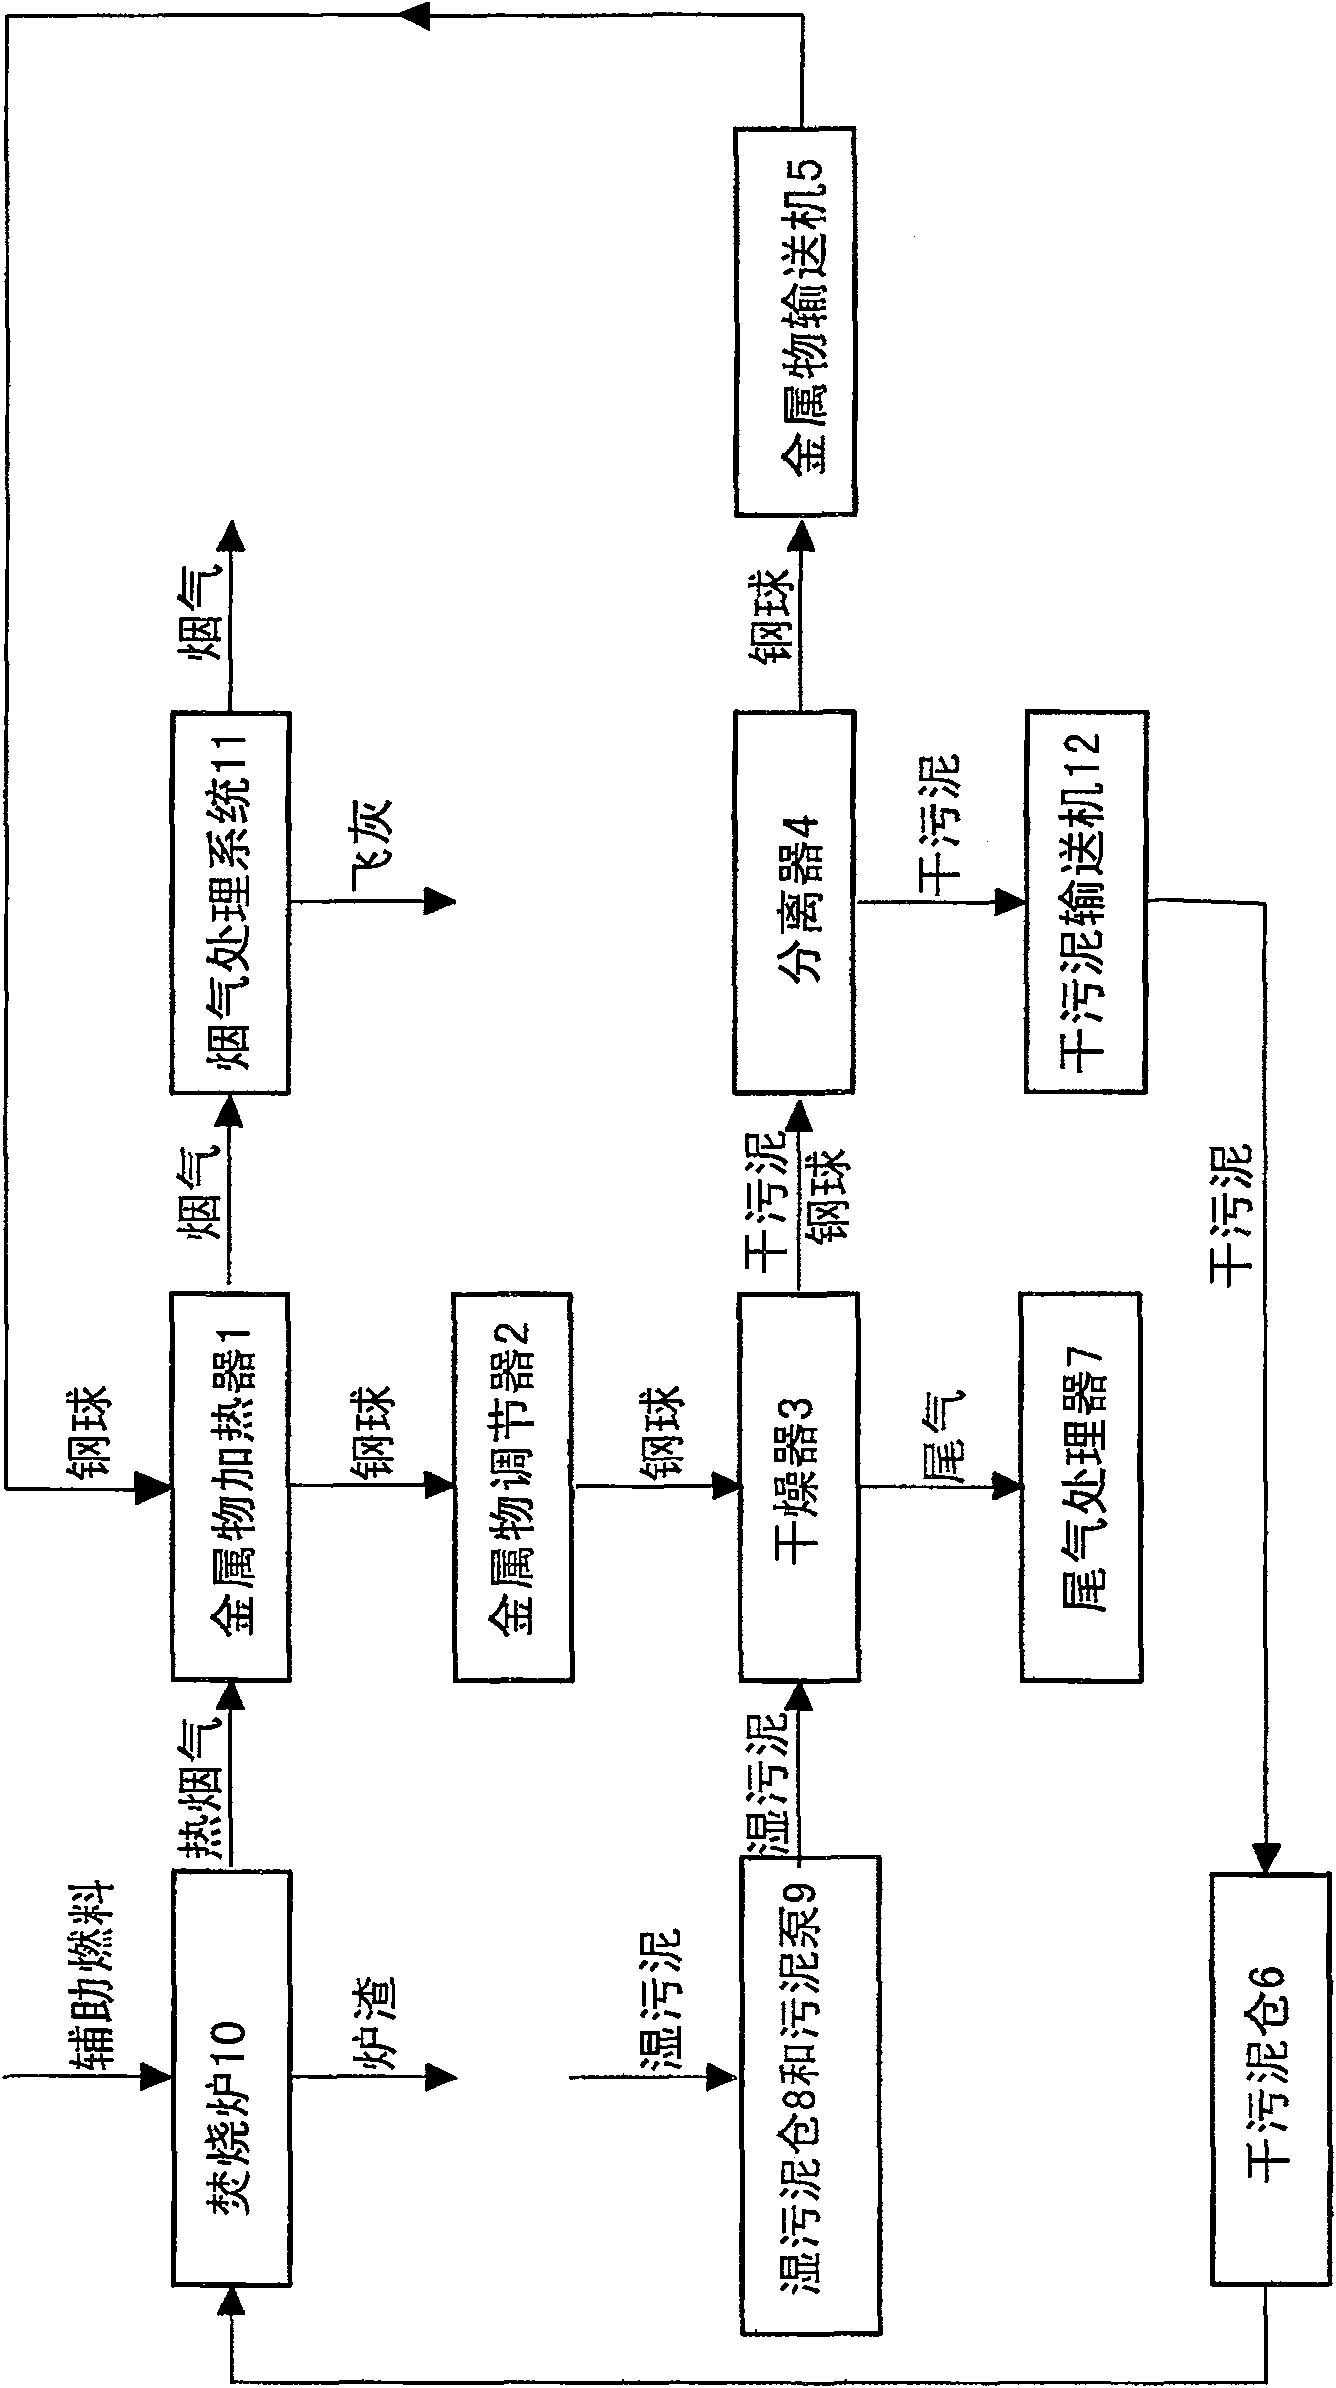 Waste drying method and its system device